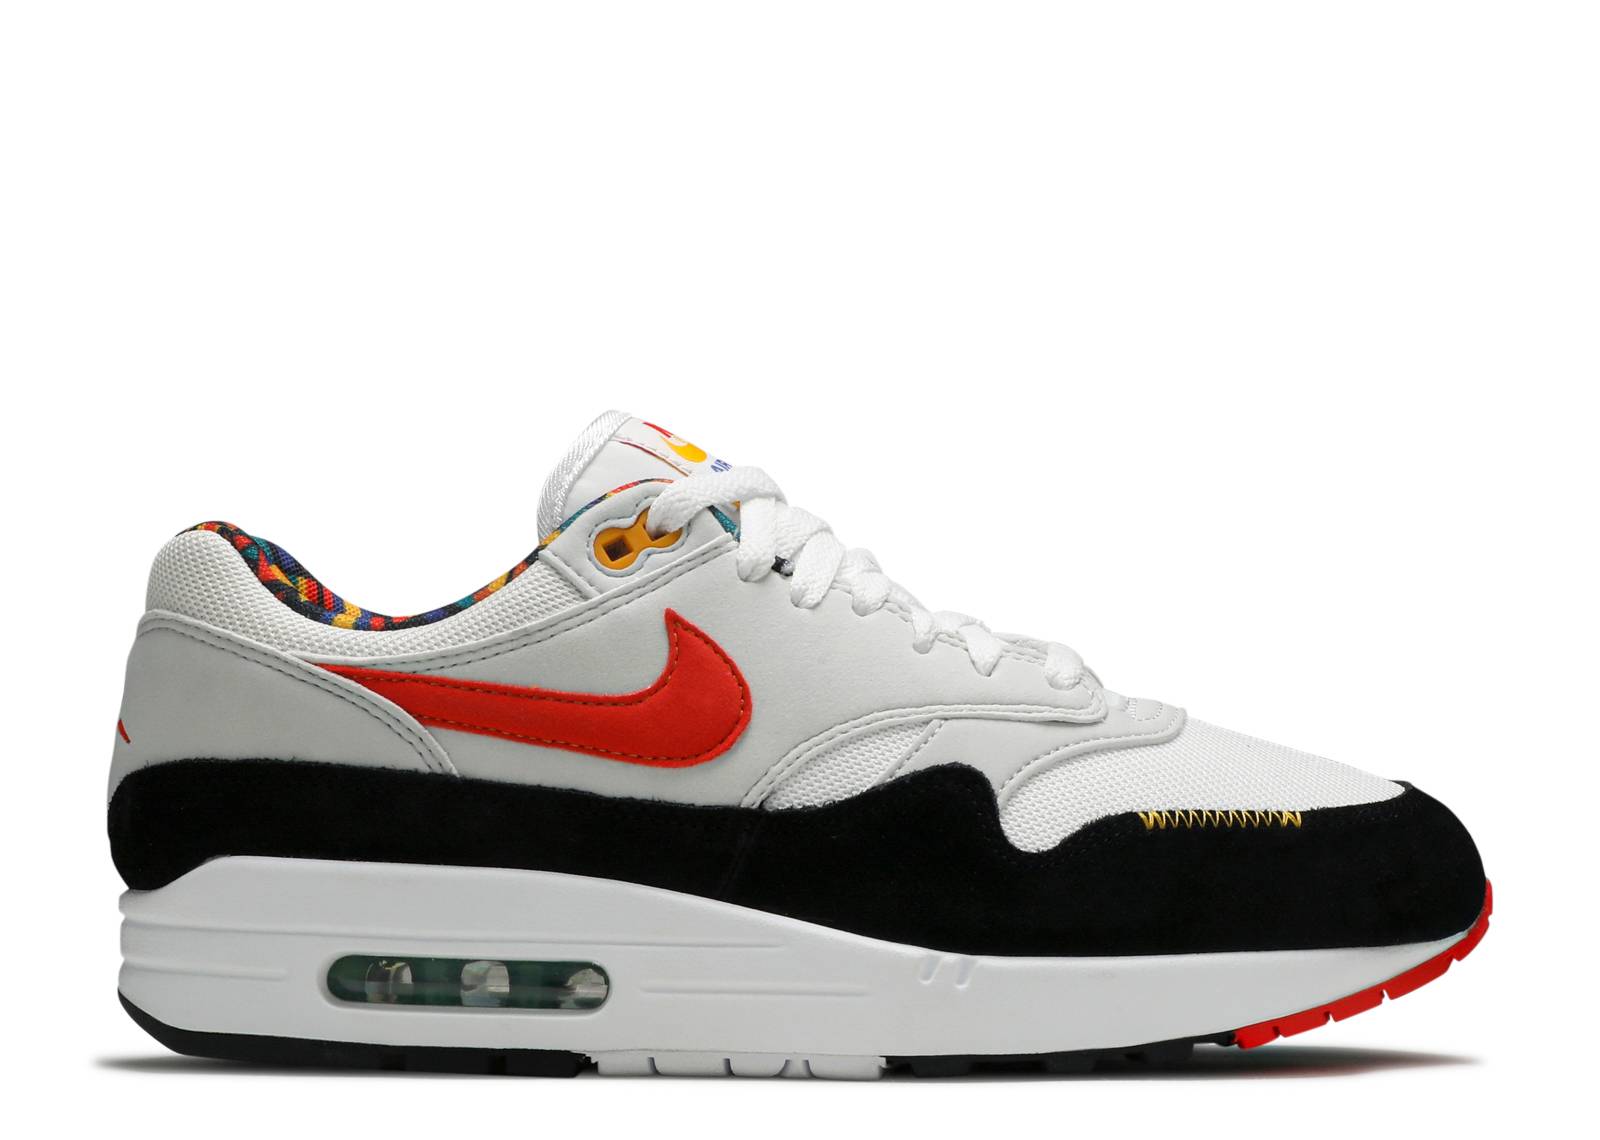 Air Max 1 'Live Together, Play Together'